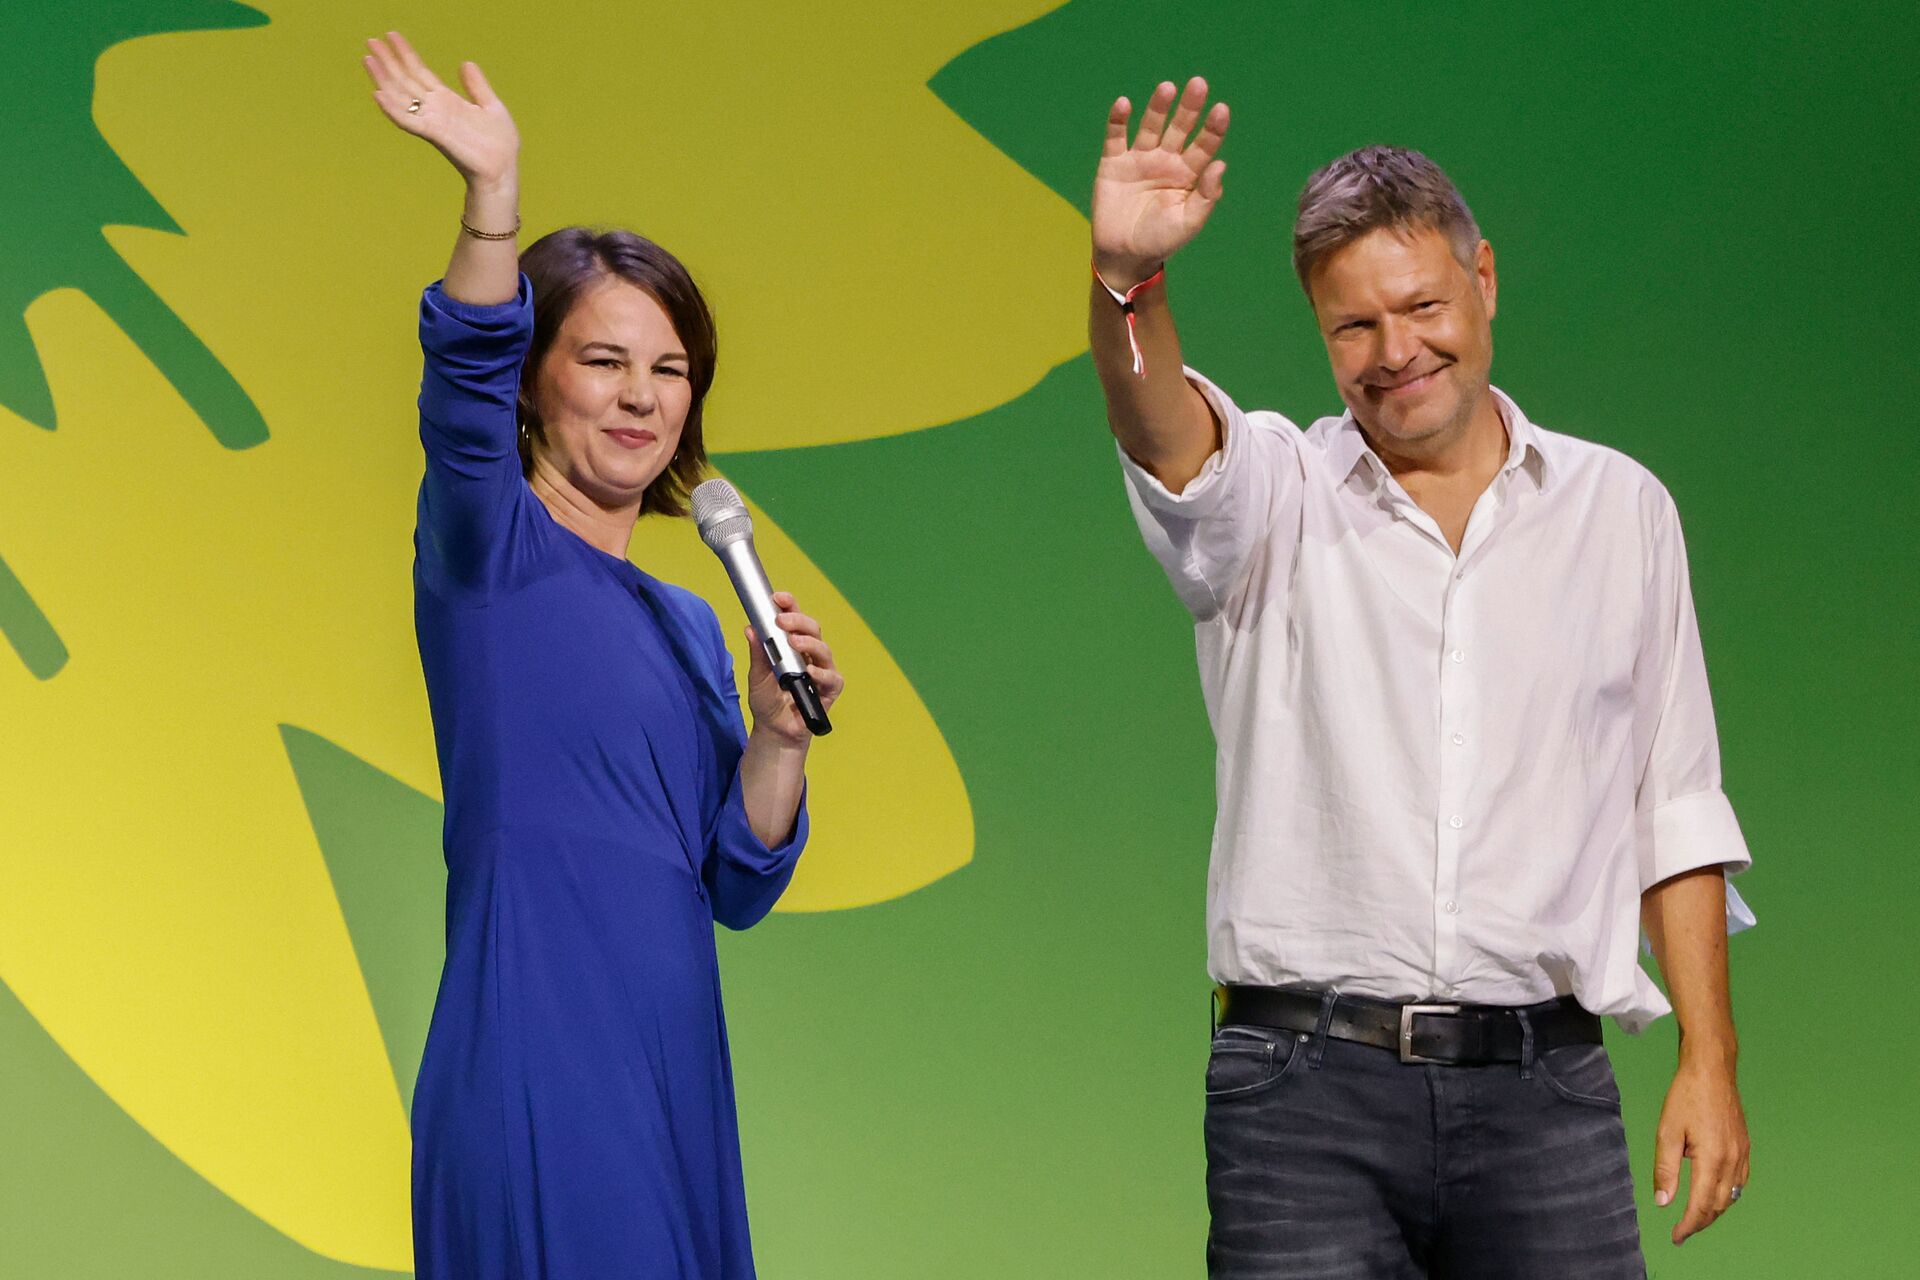 The co-leader of Germany's Green party (Die Gruenen) and the party's candidate for chancellor Annalena Baerbock (L) and co-leader of Germany's Green party (Die Gruenen) Robert Habeck wave at their electoral party after estimates were broadcast on television in Berlin on 26 September 2021 after the German general elections.  - Sputnik International, 1920, 27.09.2021